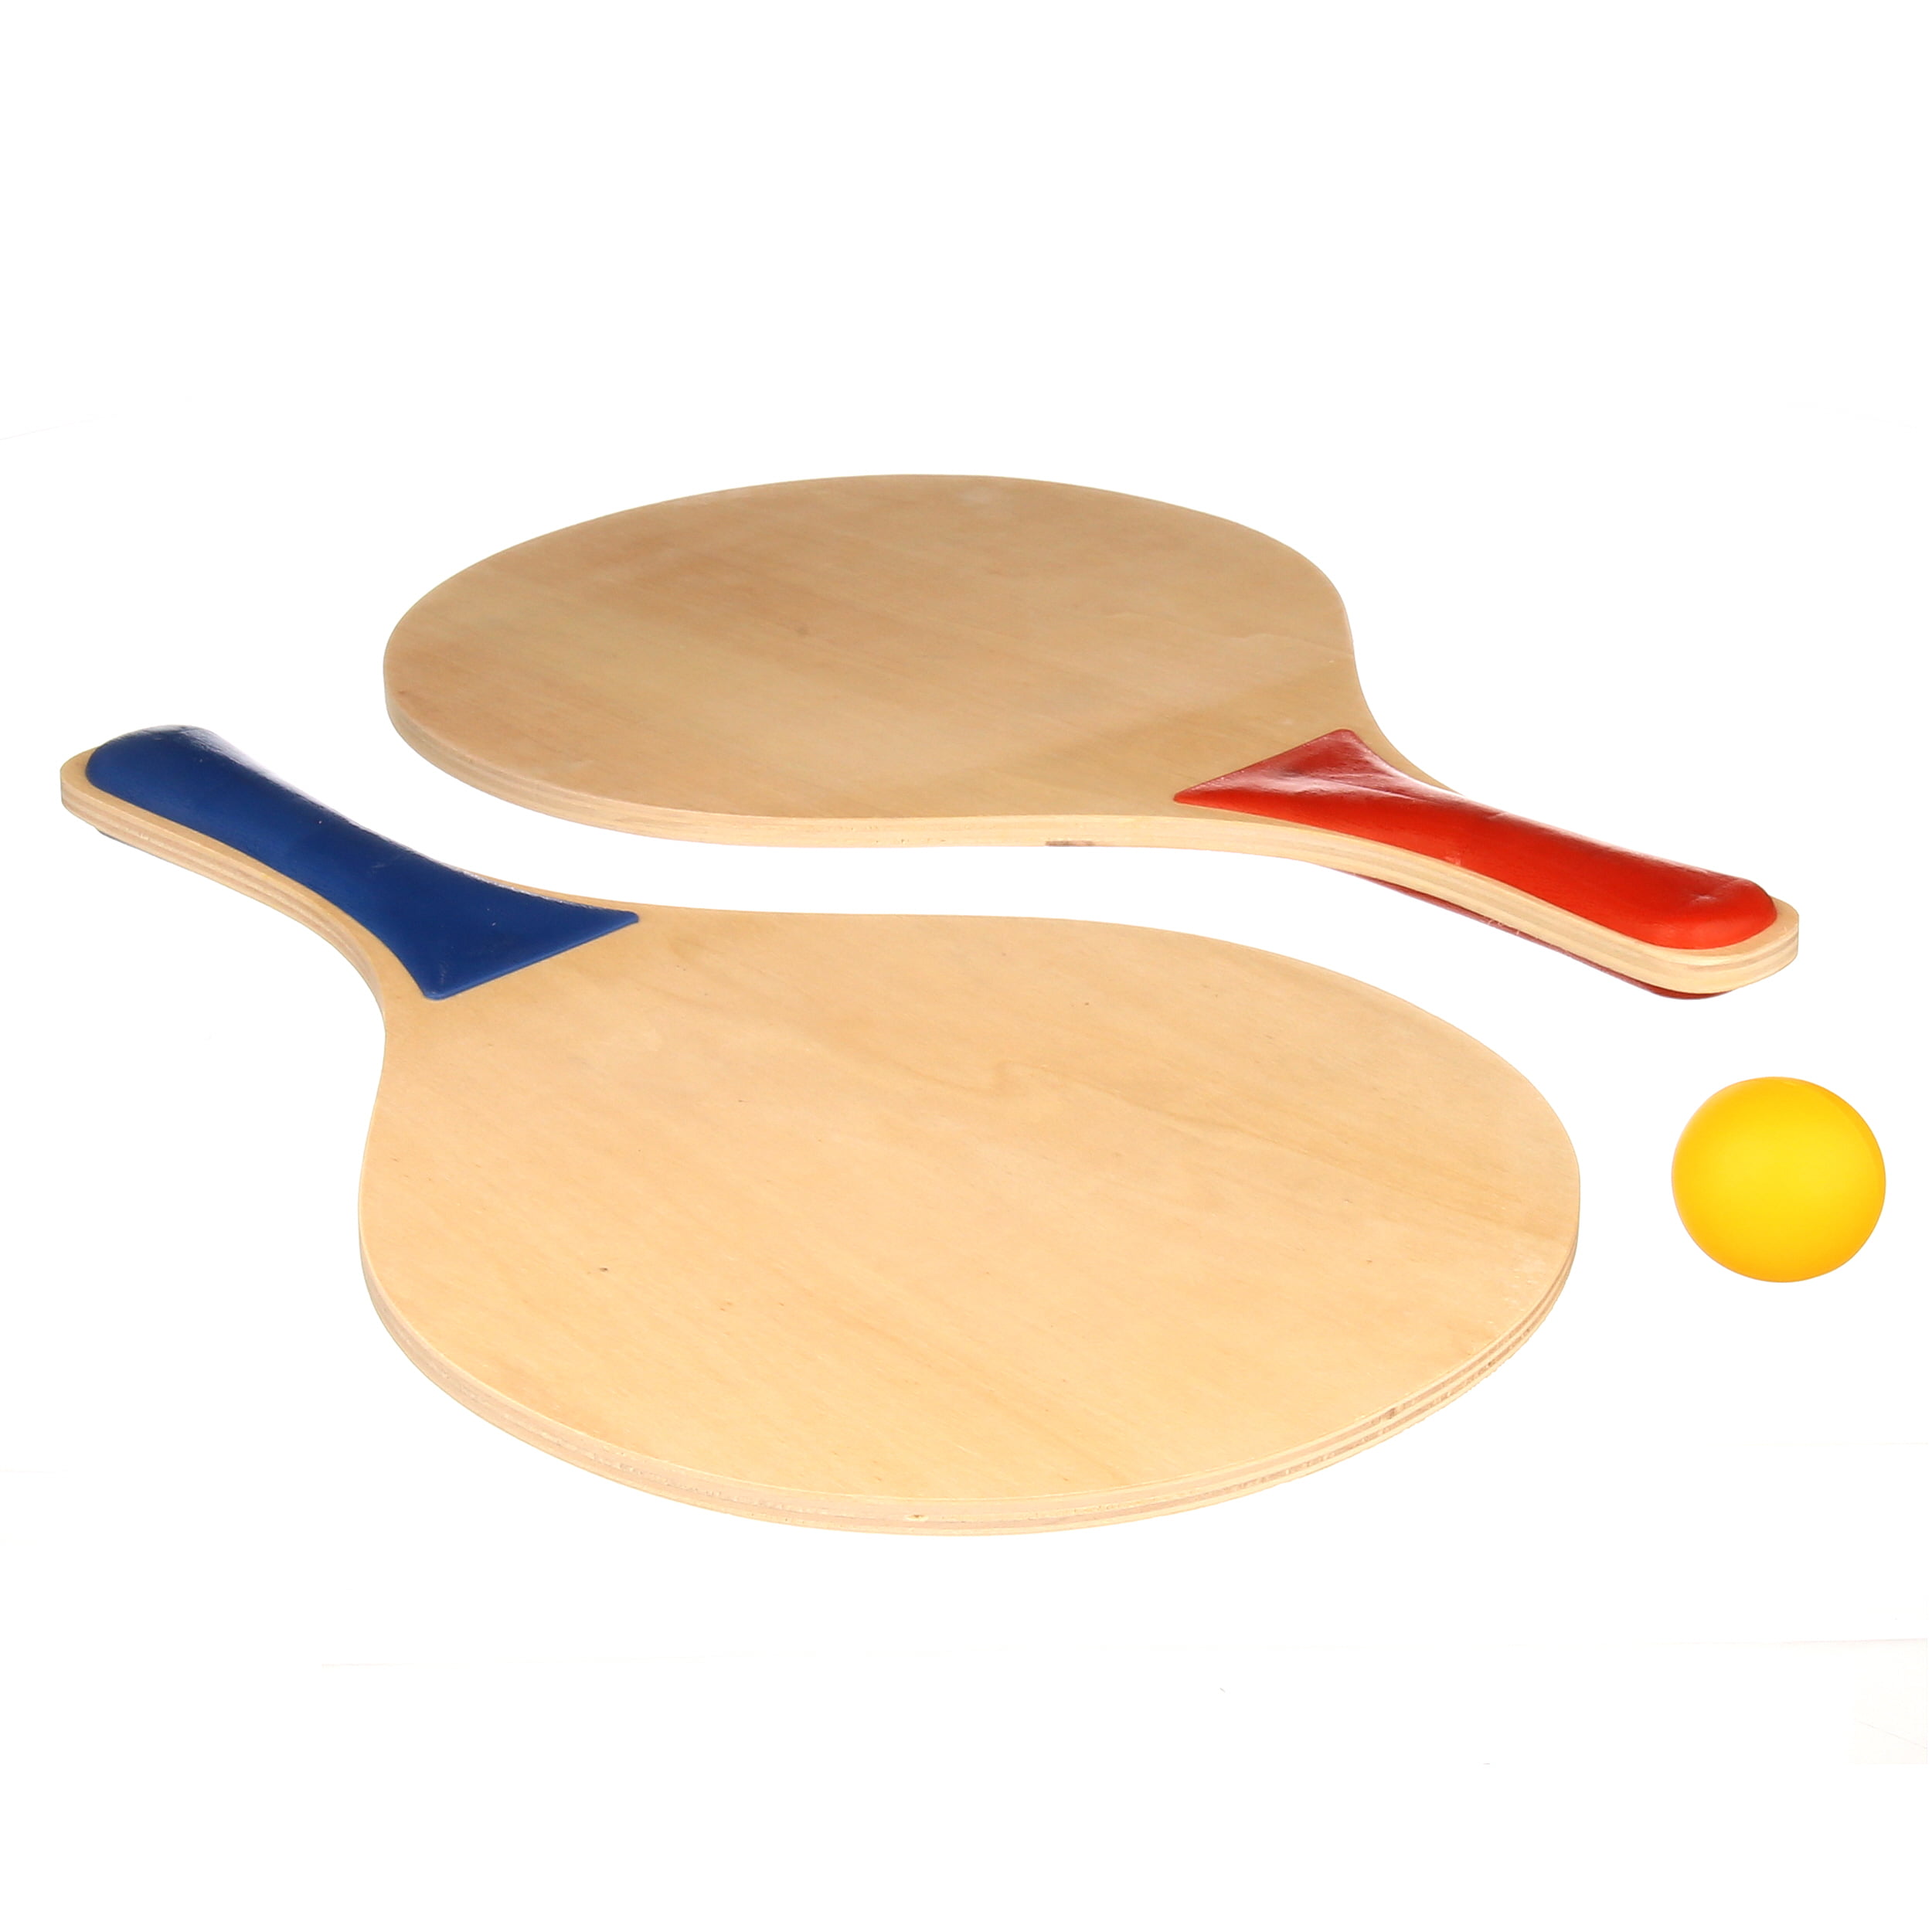 Paddle Ball Beach Ball Game - Wooden Set of 2 Paddles and Ball 